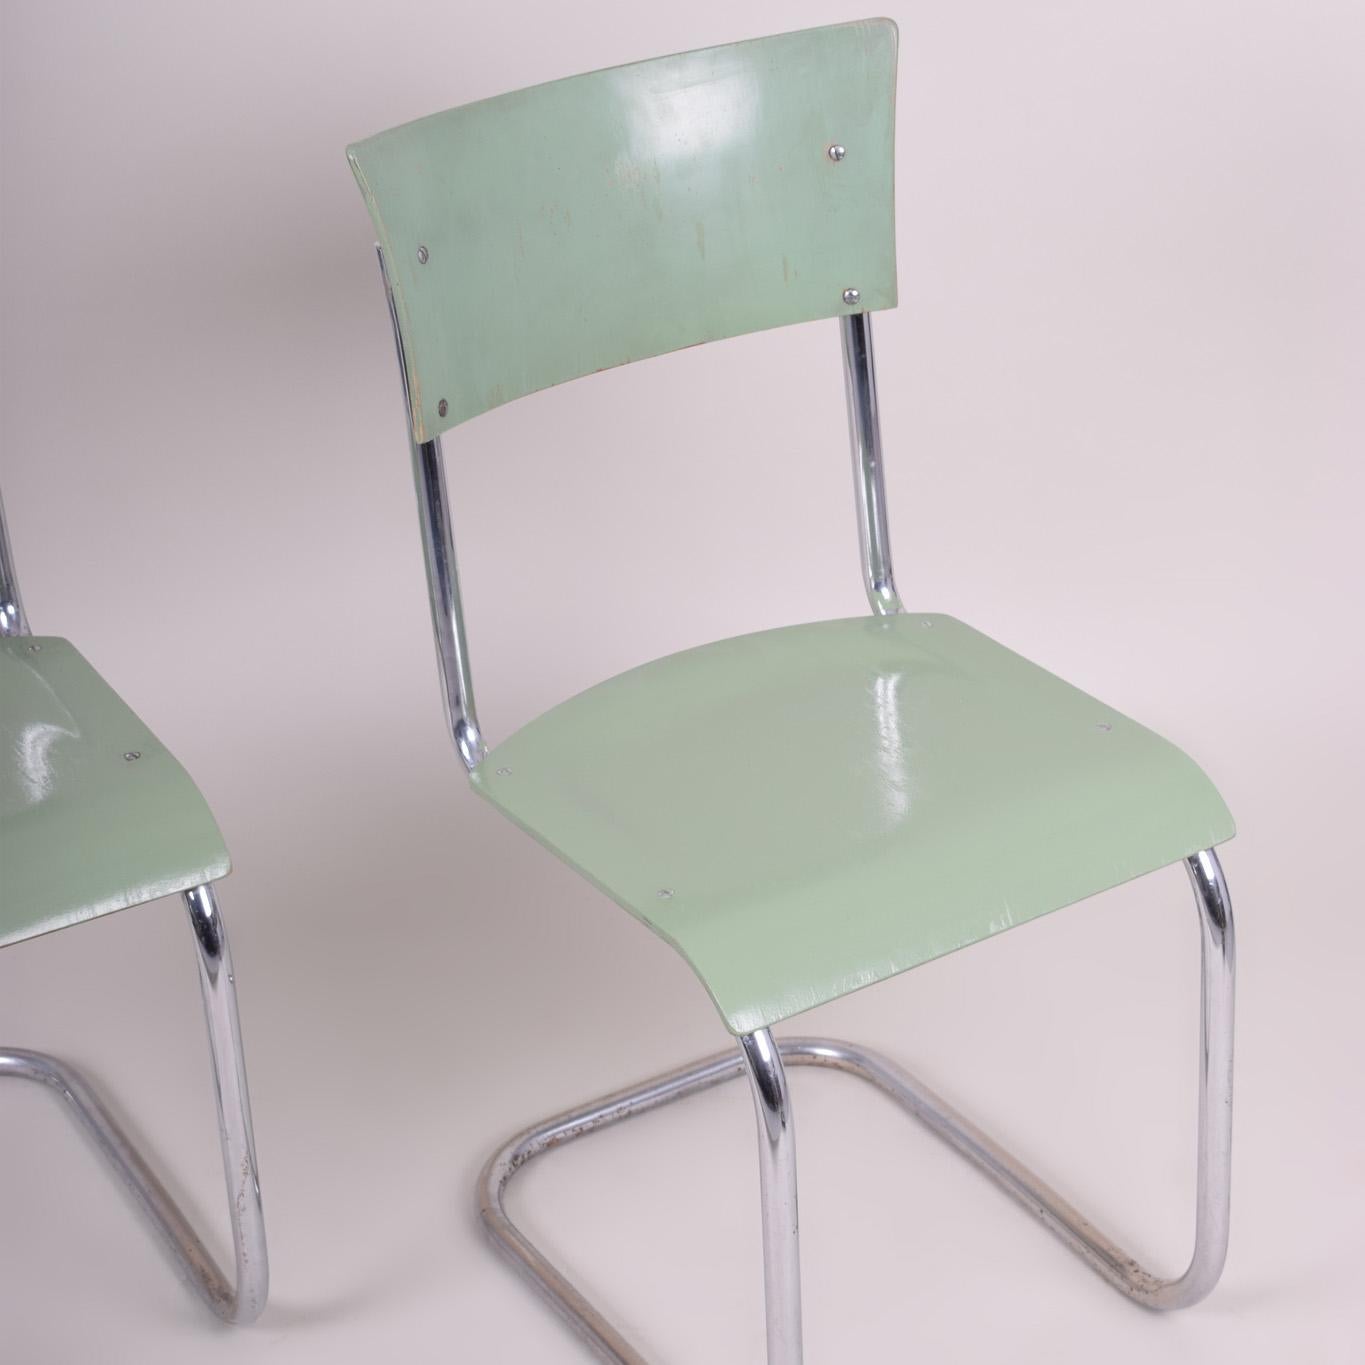 Steel Pair of Green Bauhaus Chairs Made in 1930s Czechia, Made by Robert Slezák For Sale